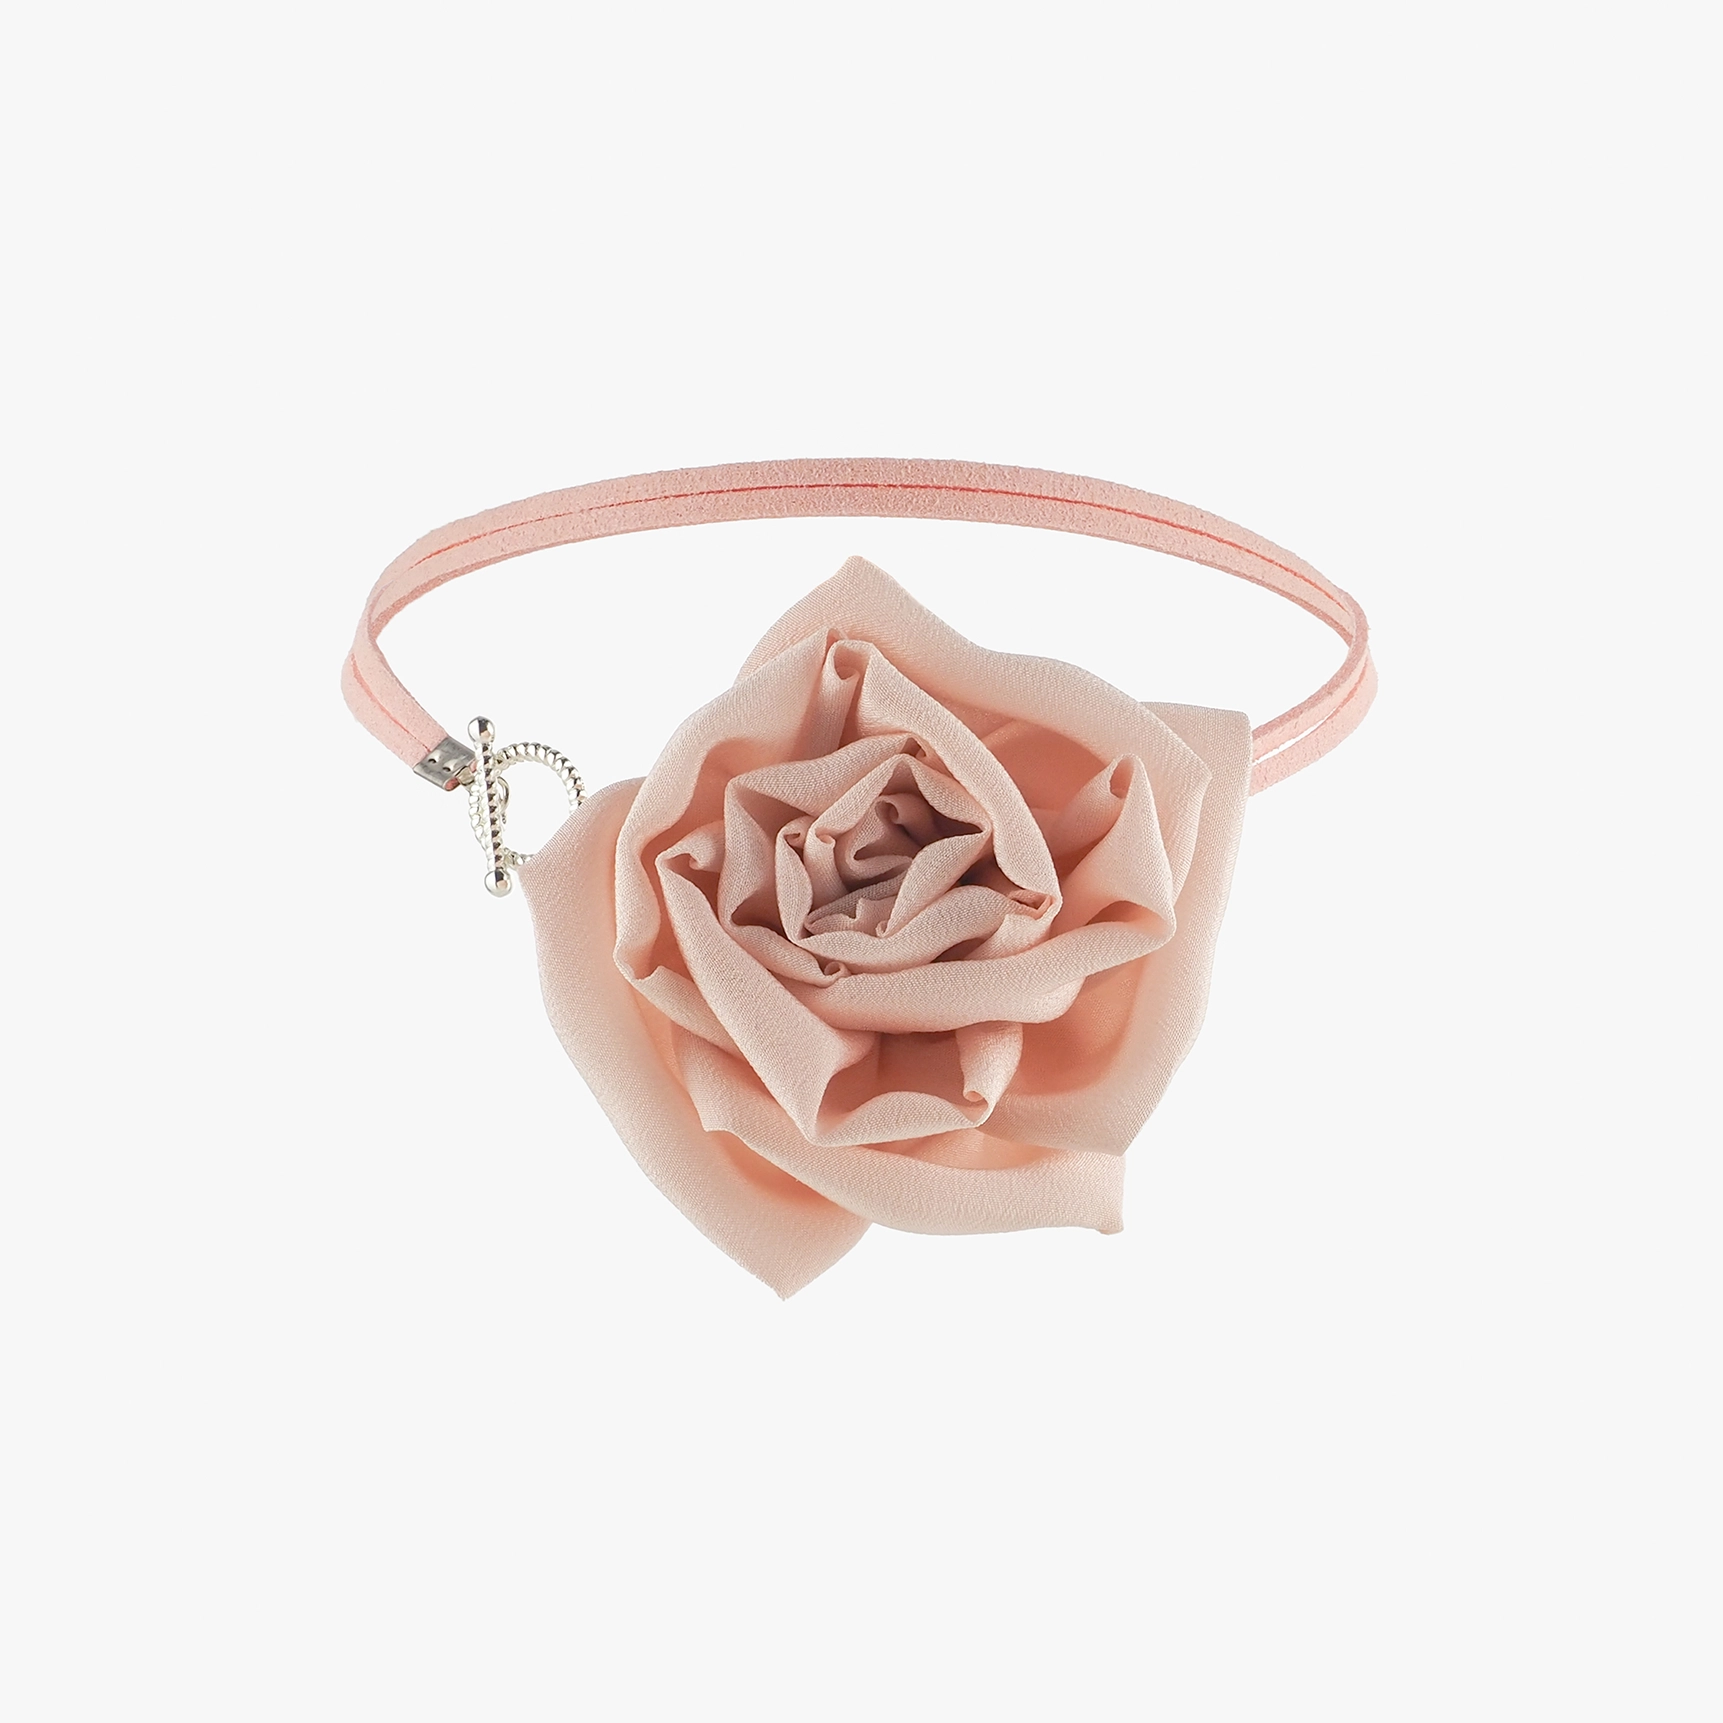 Pink Silk Rose Choker Necklace with Toggle Clasp